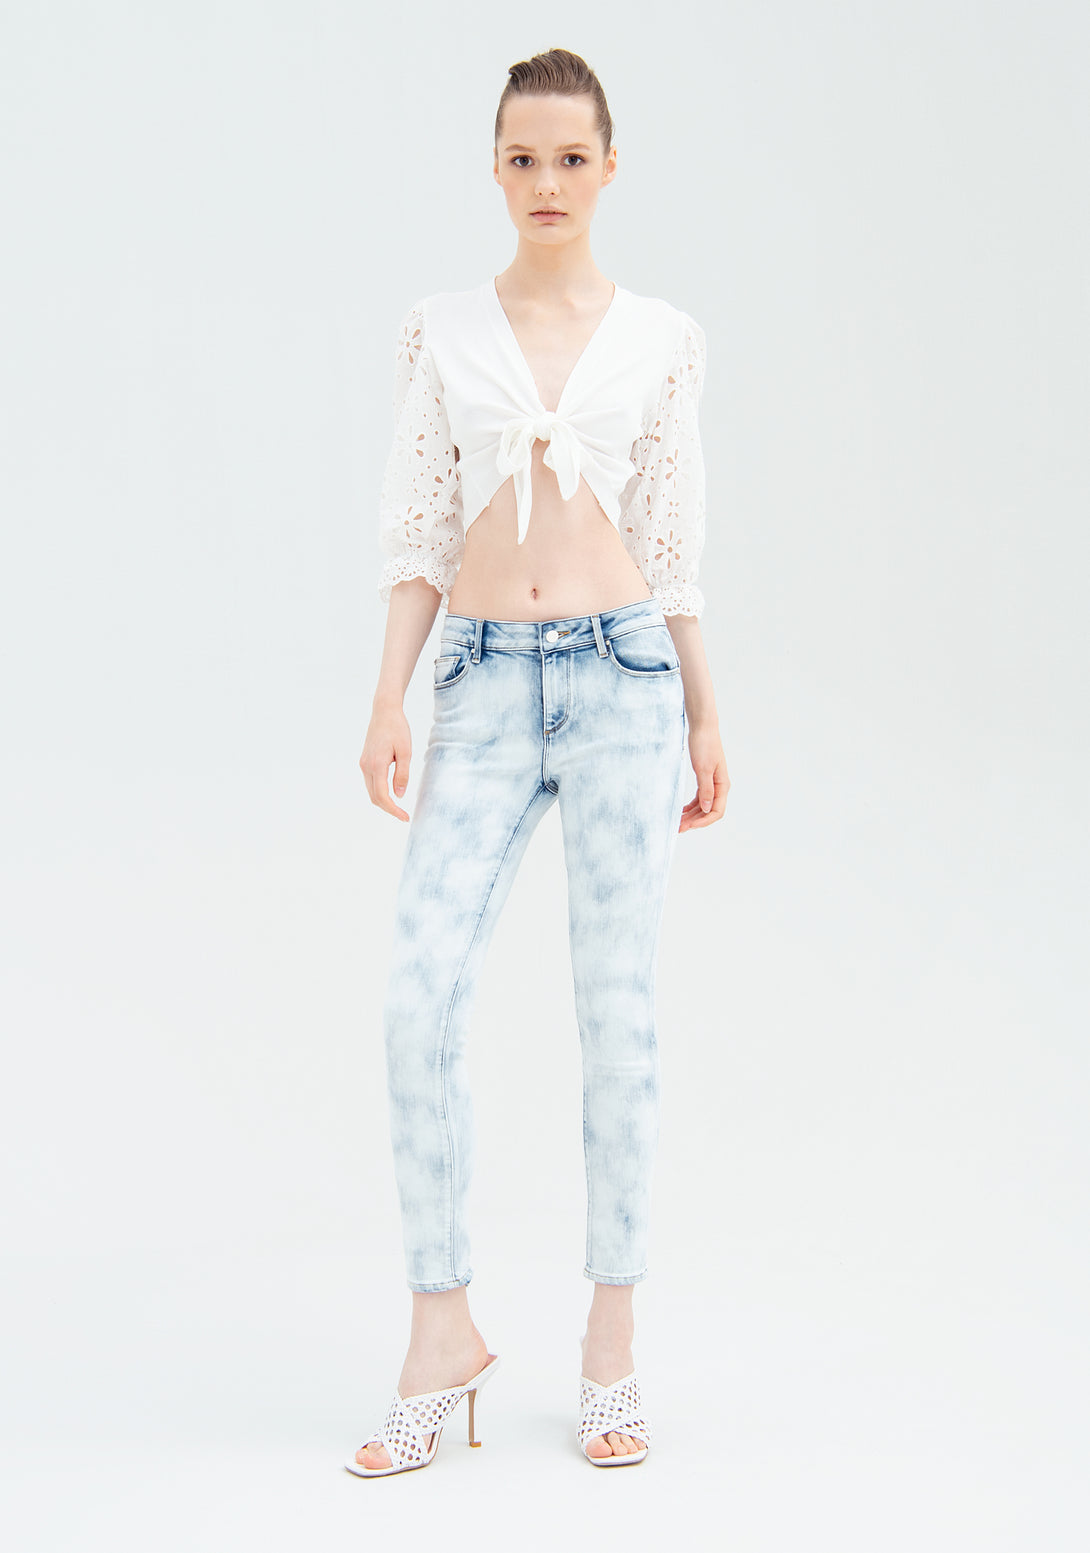 Cardigan cropped with sleeves made in San Gallo lace